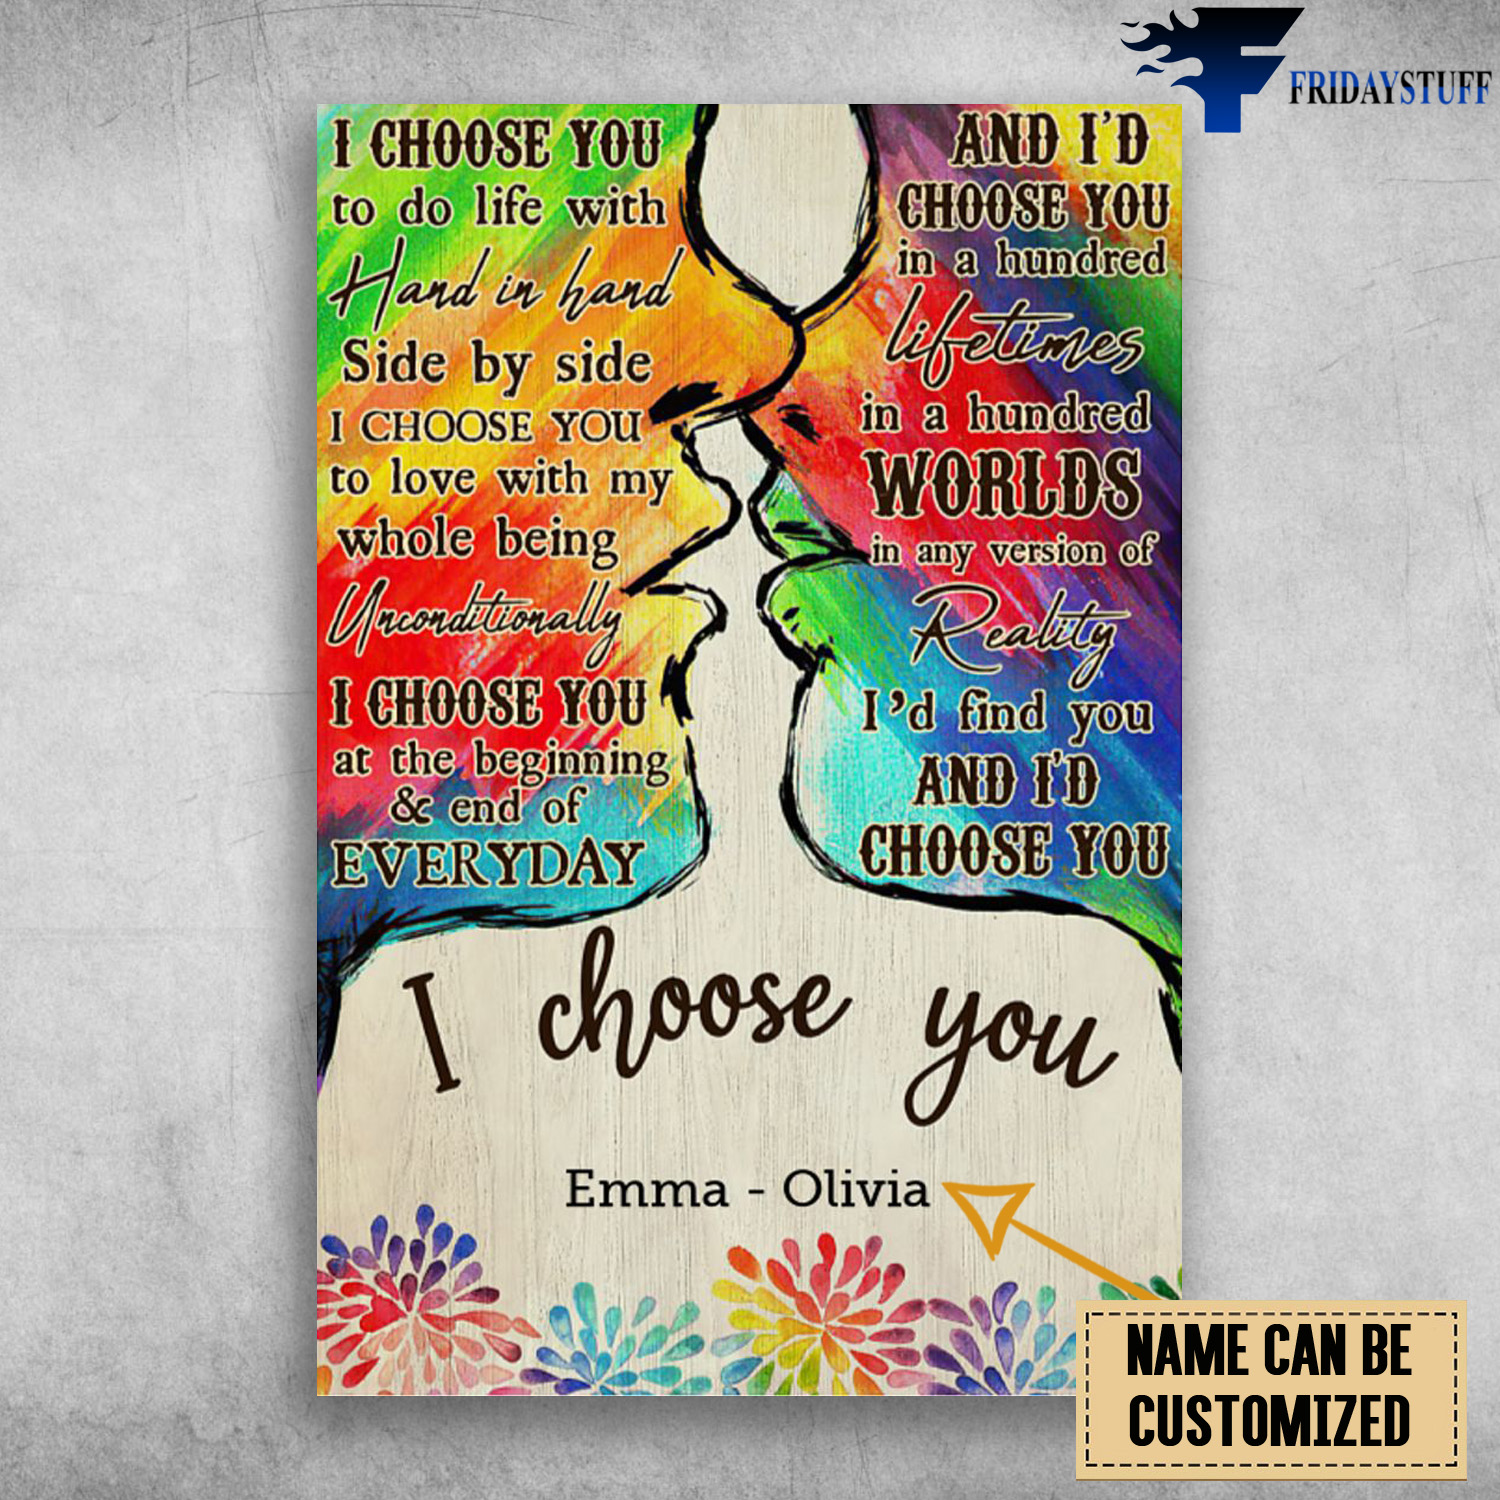 LGBT Couple – I Choose You To Do Life, Wit Hand In Hand, Side By Side, I Choose You To Love With My Whole Being Unconditionally, I Choose You At Beginning And End Of Everyday